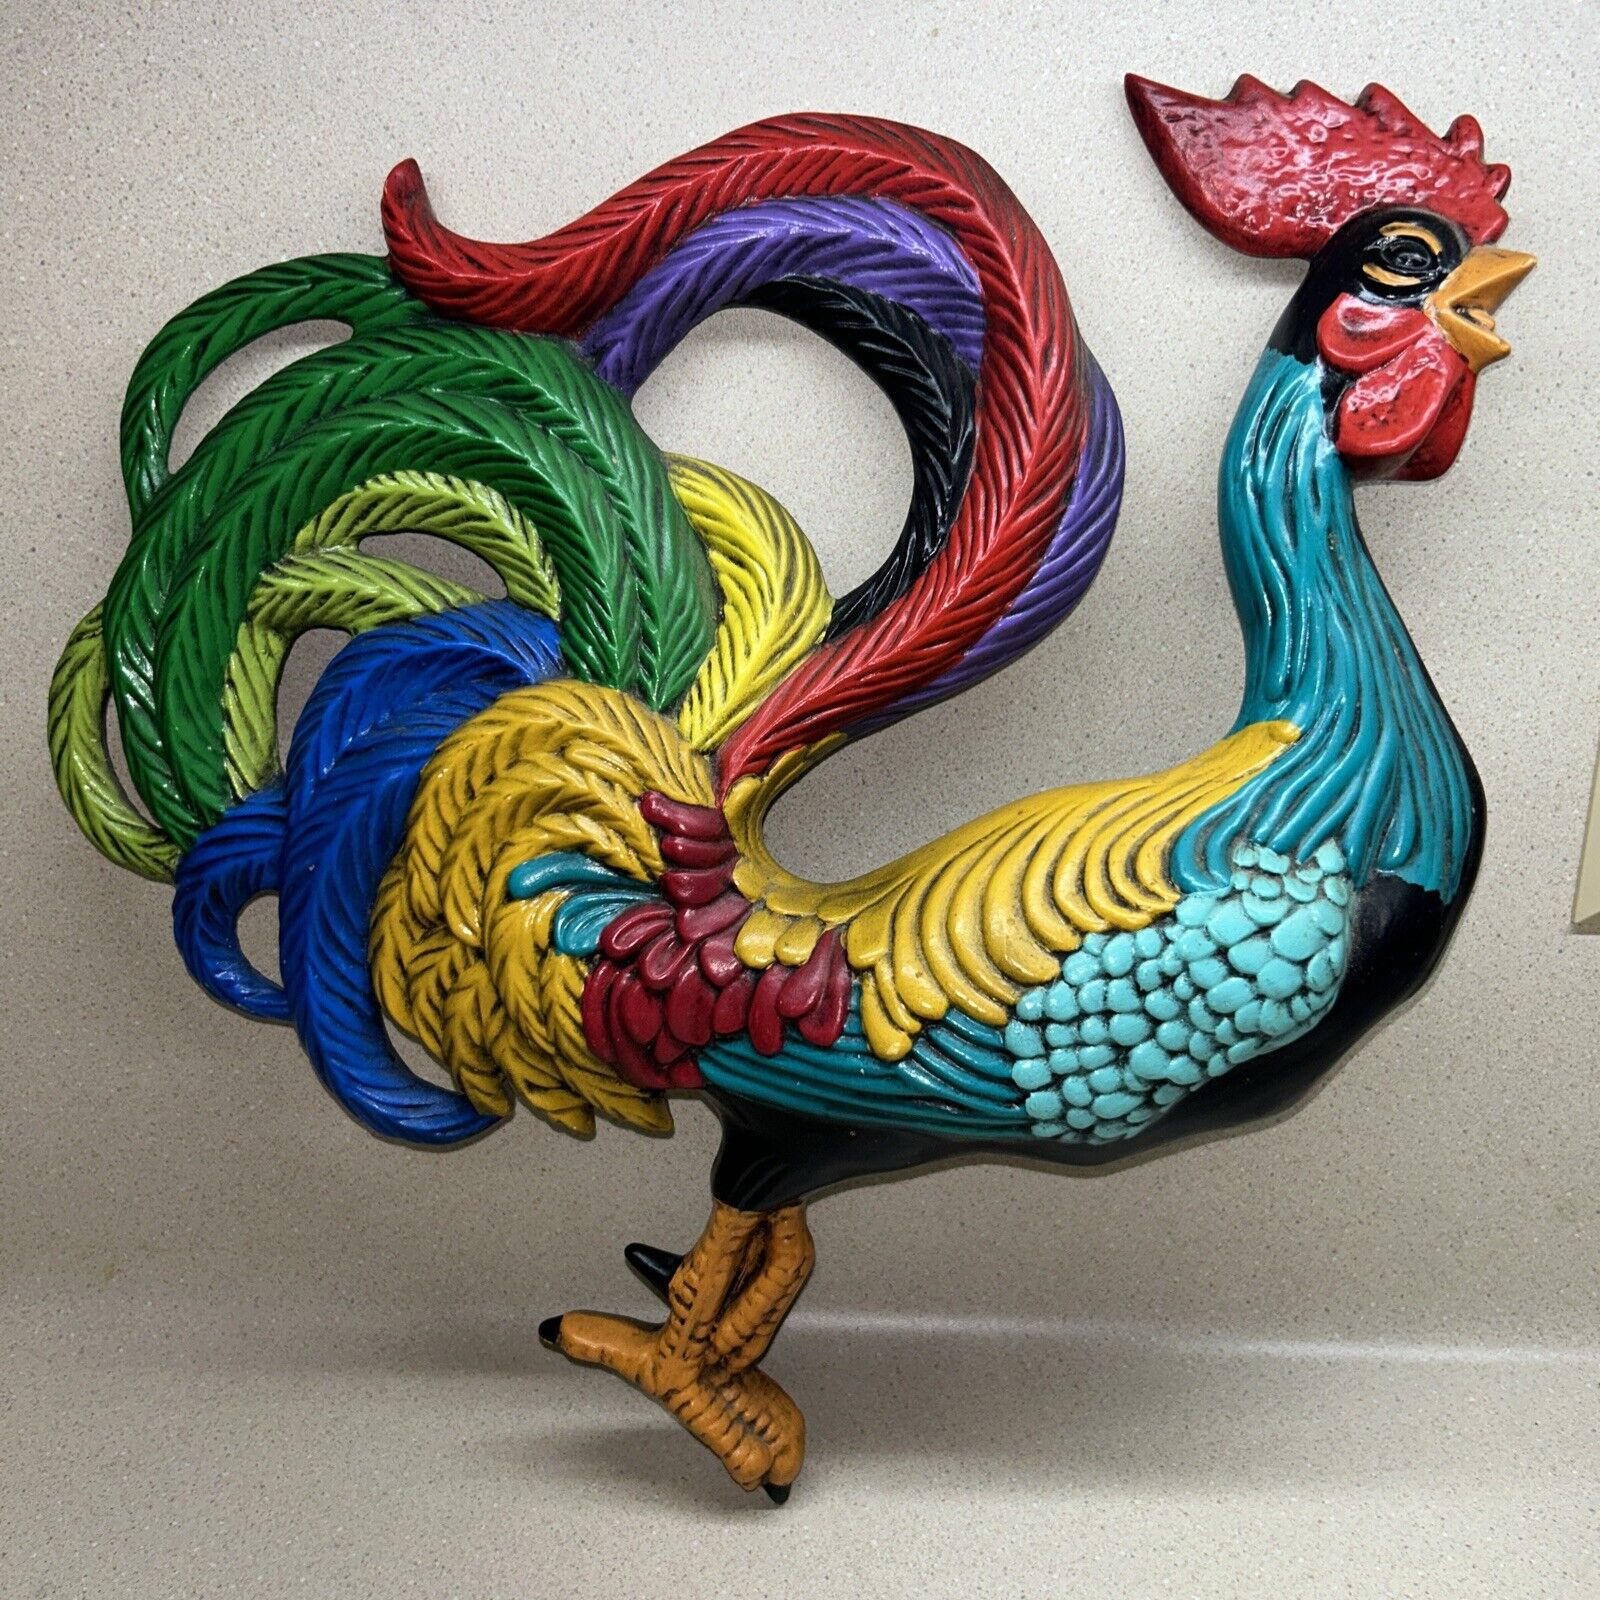 Vintage Chalkware Rooster Wall Art Retro Mid Century Kitchen Decor 15” Colorful